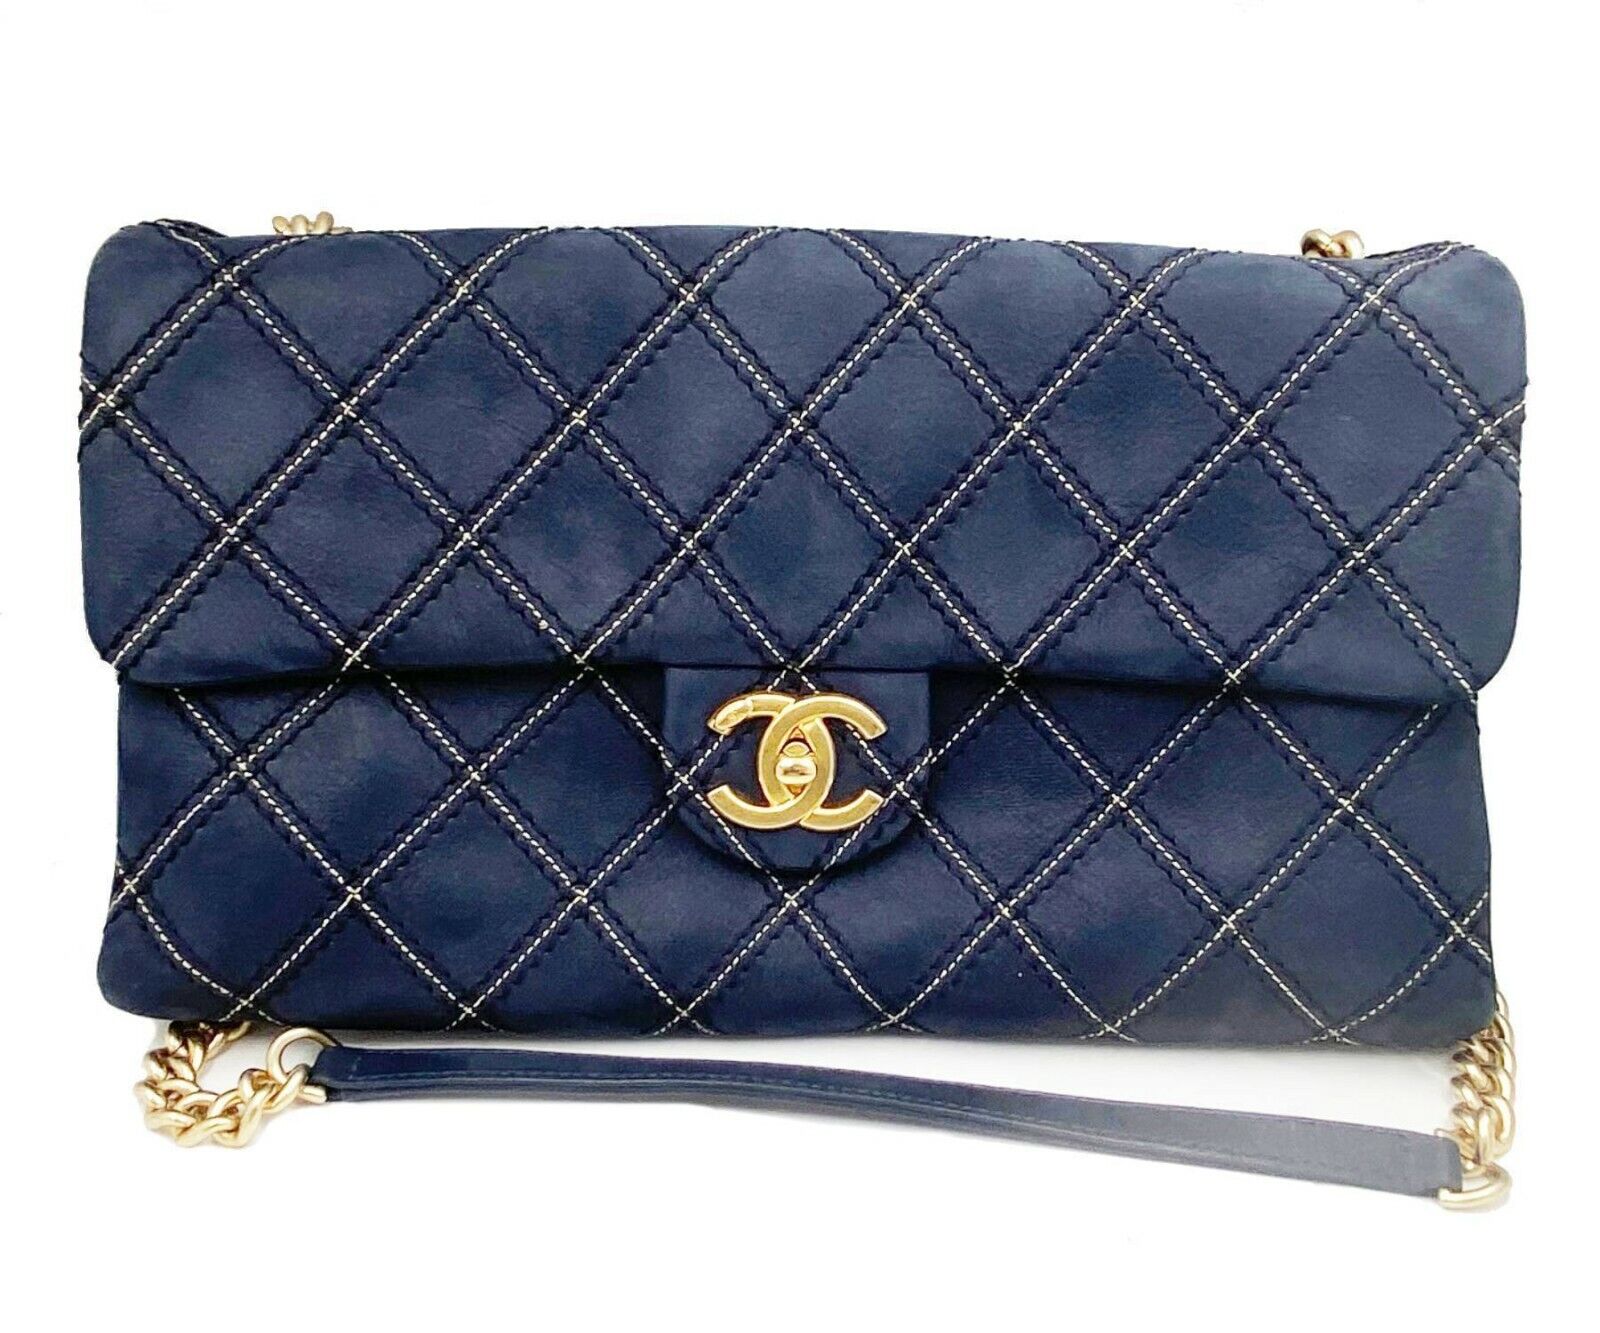 Chanel Navy Stitching Suede Rectangle Crossbody Bag with Mirror